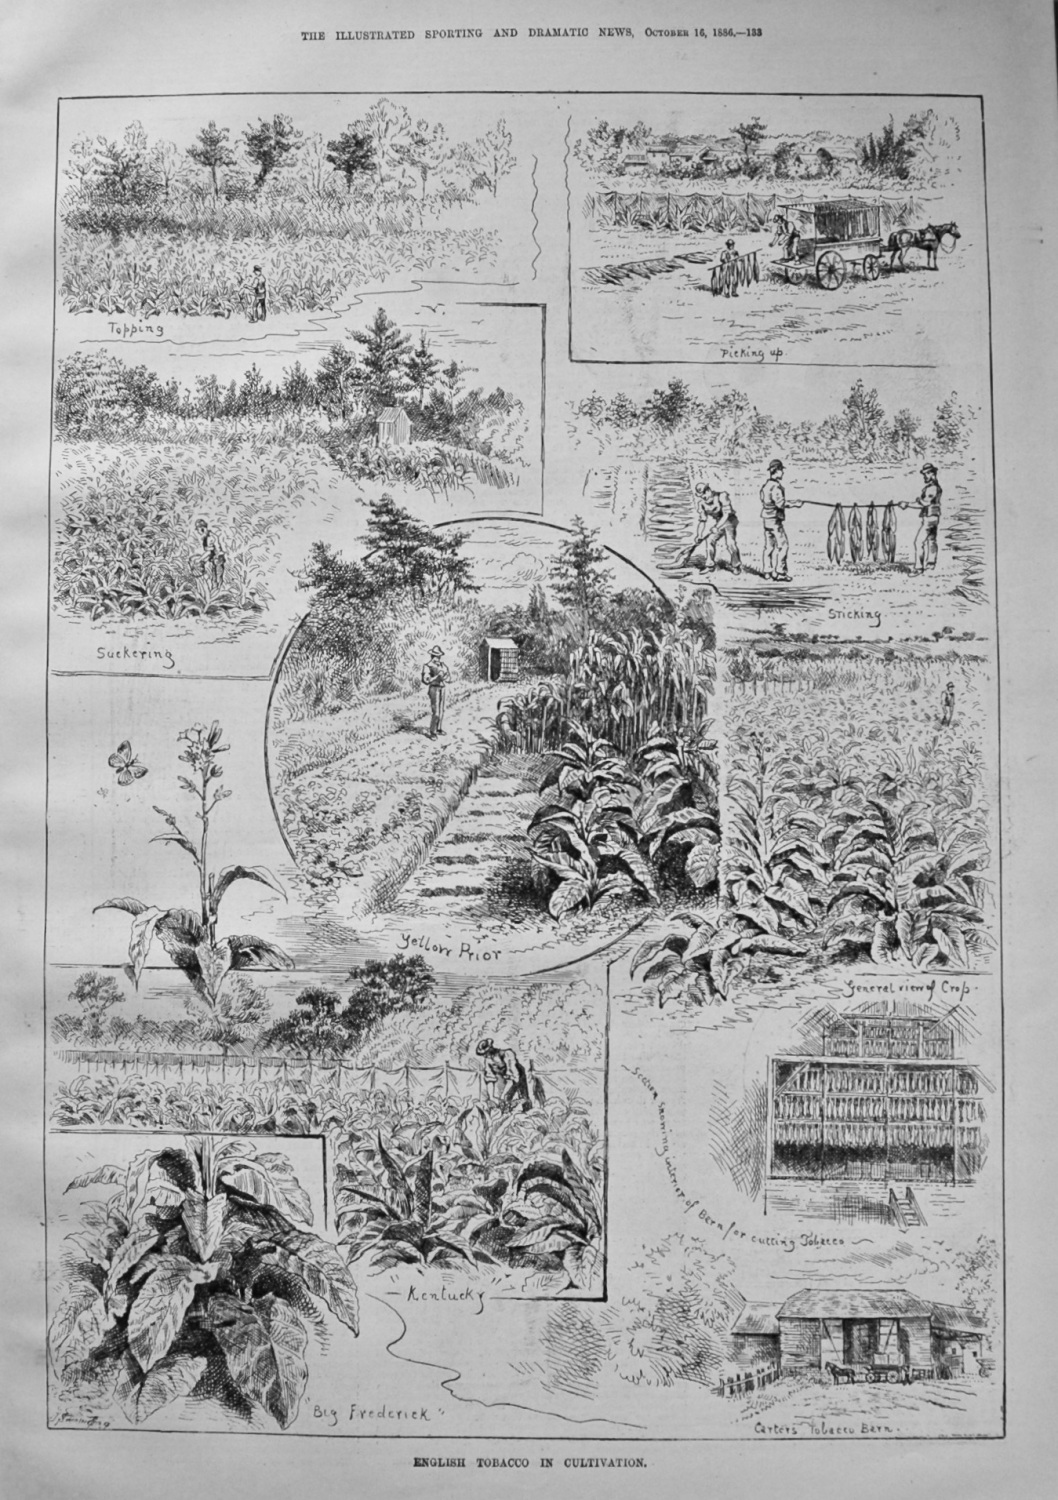 English Tobacco in Cultivation. 1886